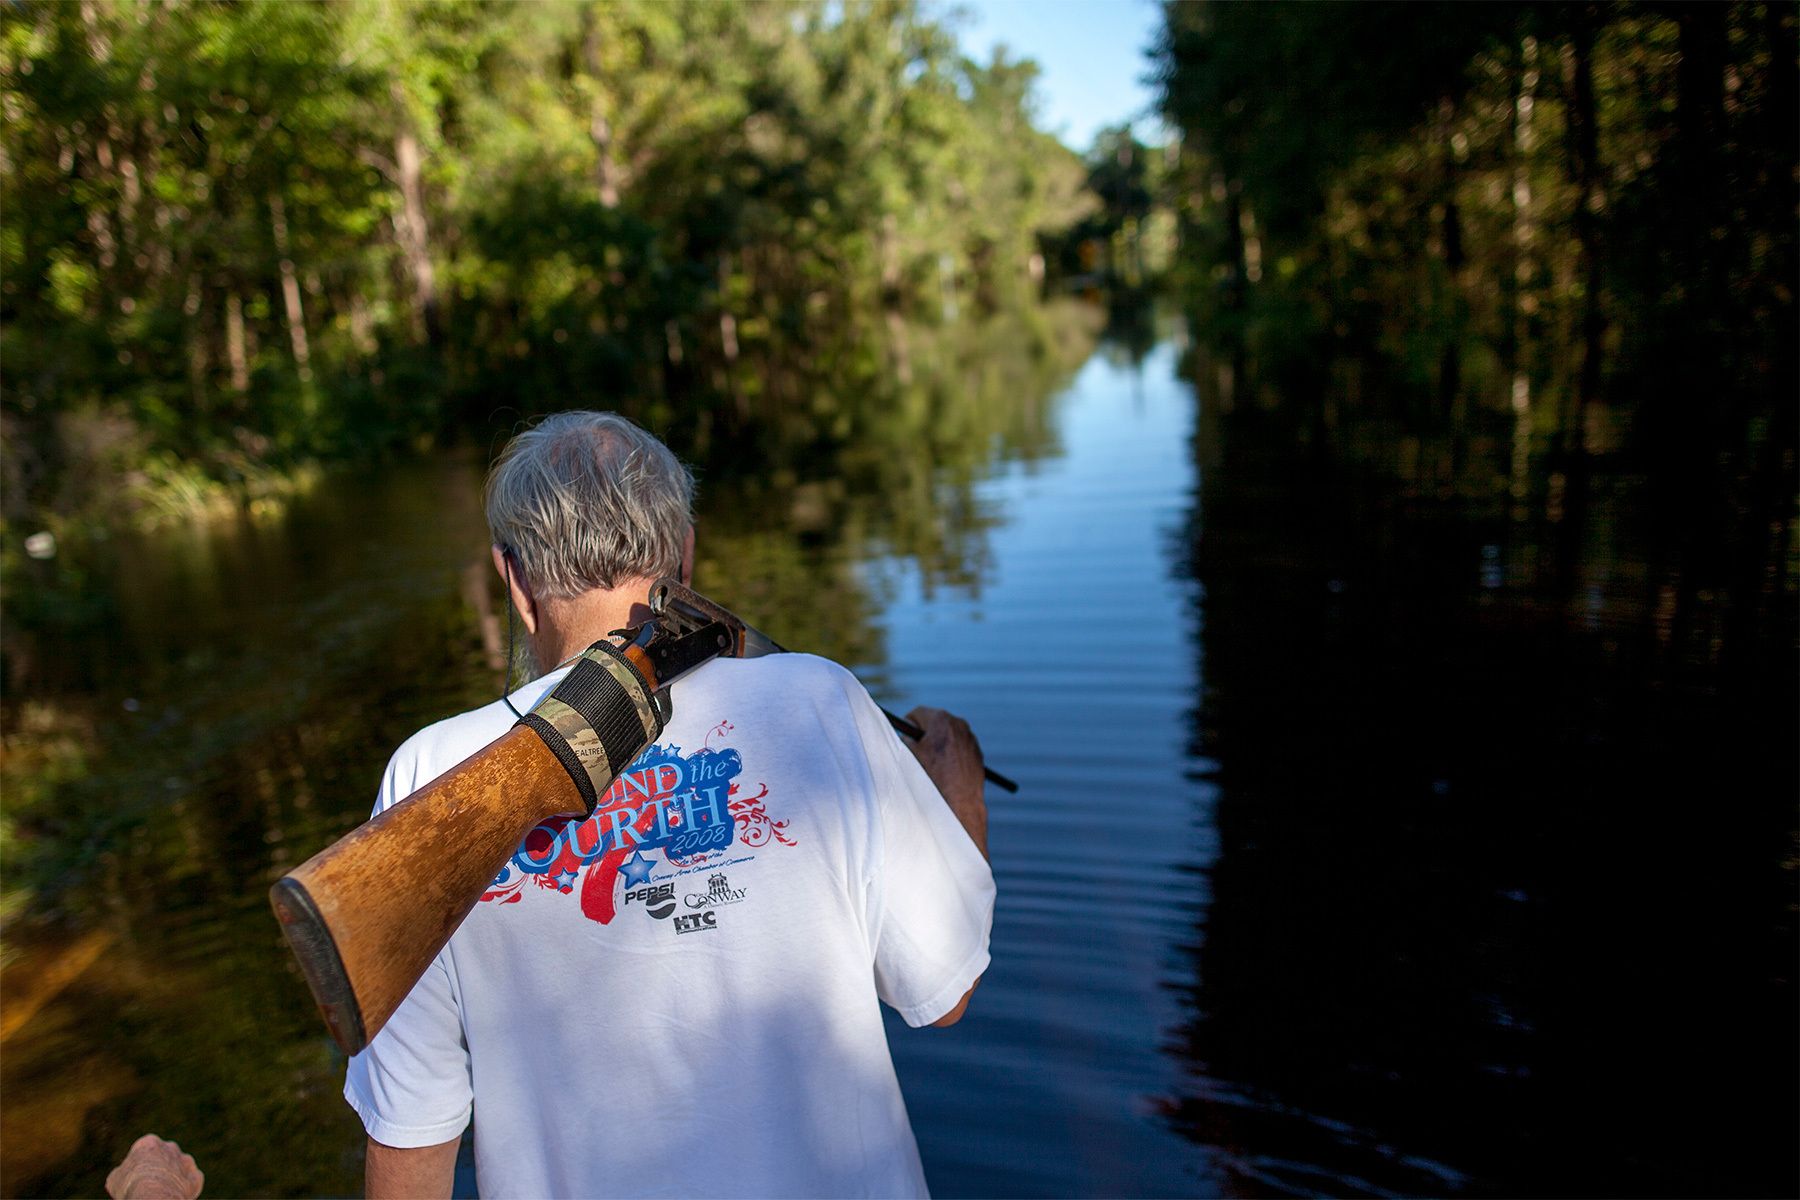 Harry Lockwood of River Road carries a rifle for snakes as he and his wife Kaye (Not Pictured) walk along flooded Lee's Landing Circle in Conway, South Carolina October 7, 2015. Rescuers searched early Wednesday for two people missing in floodwaters in South Carolina, while authorities urged residents in hundreds of homes to seek higher ground. REUTERS/Randall Hill